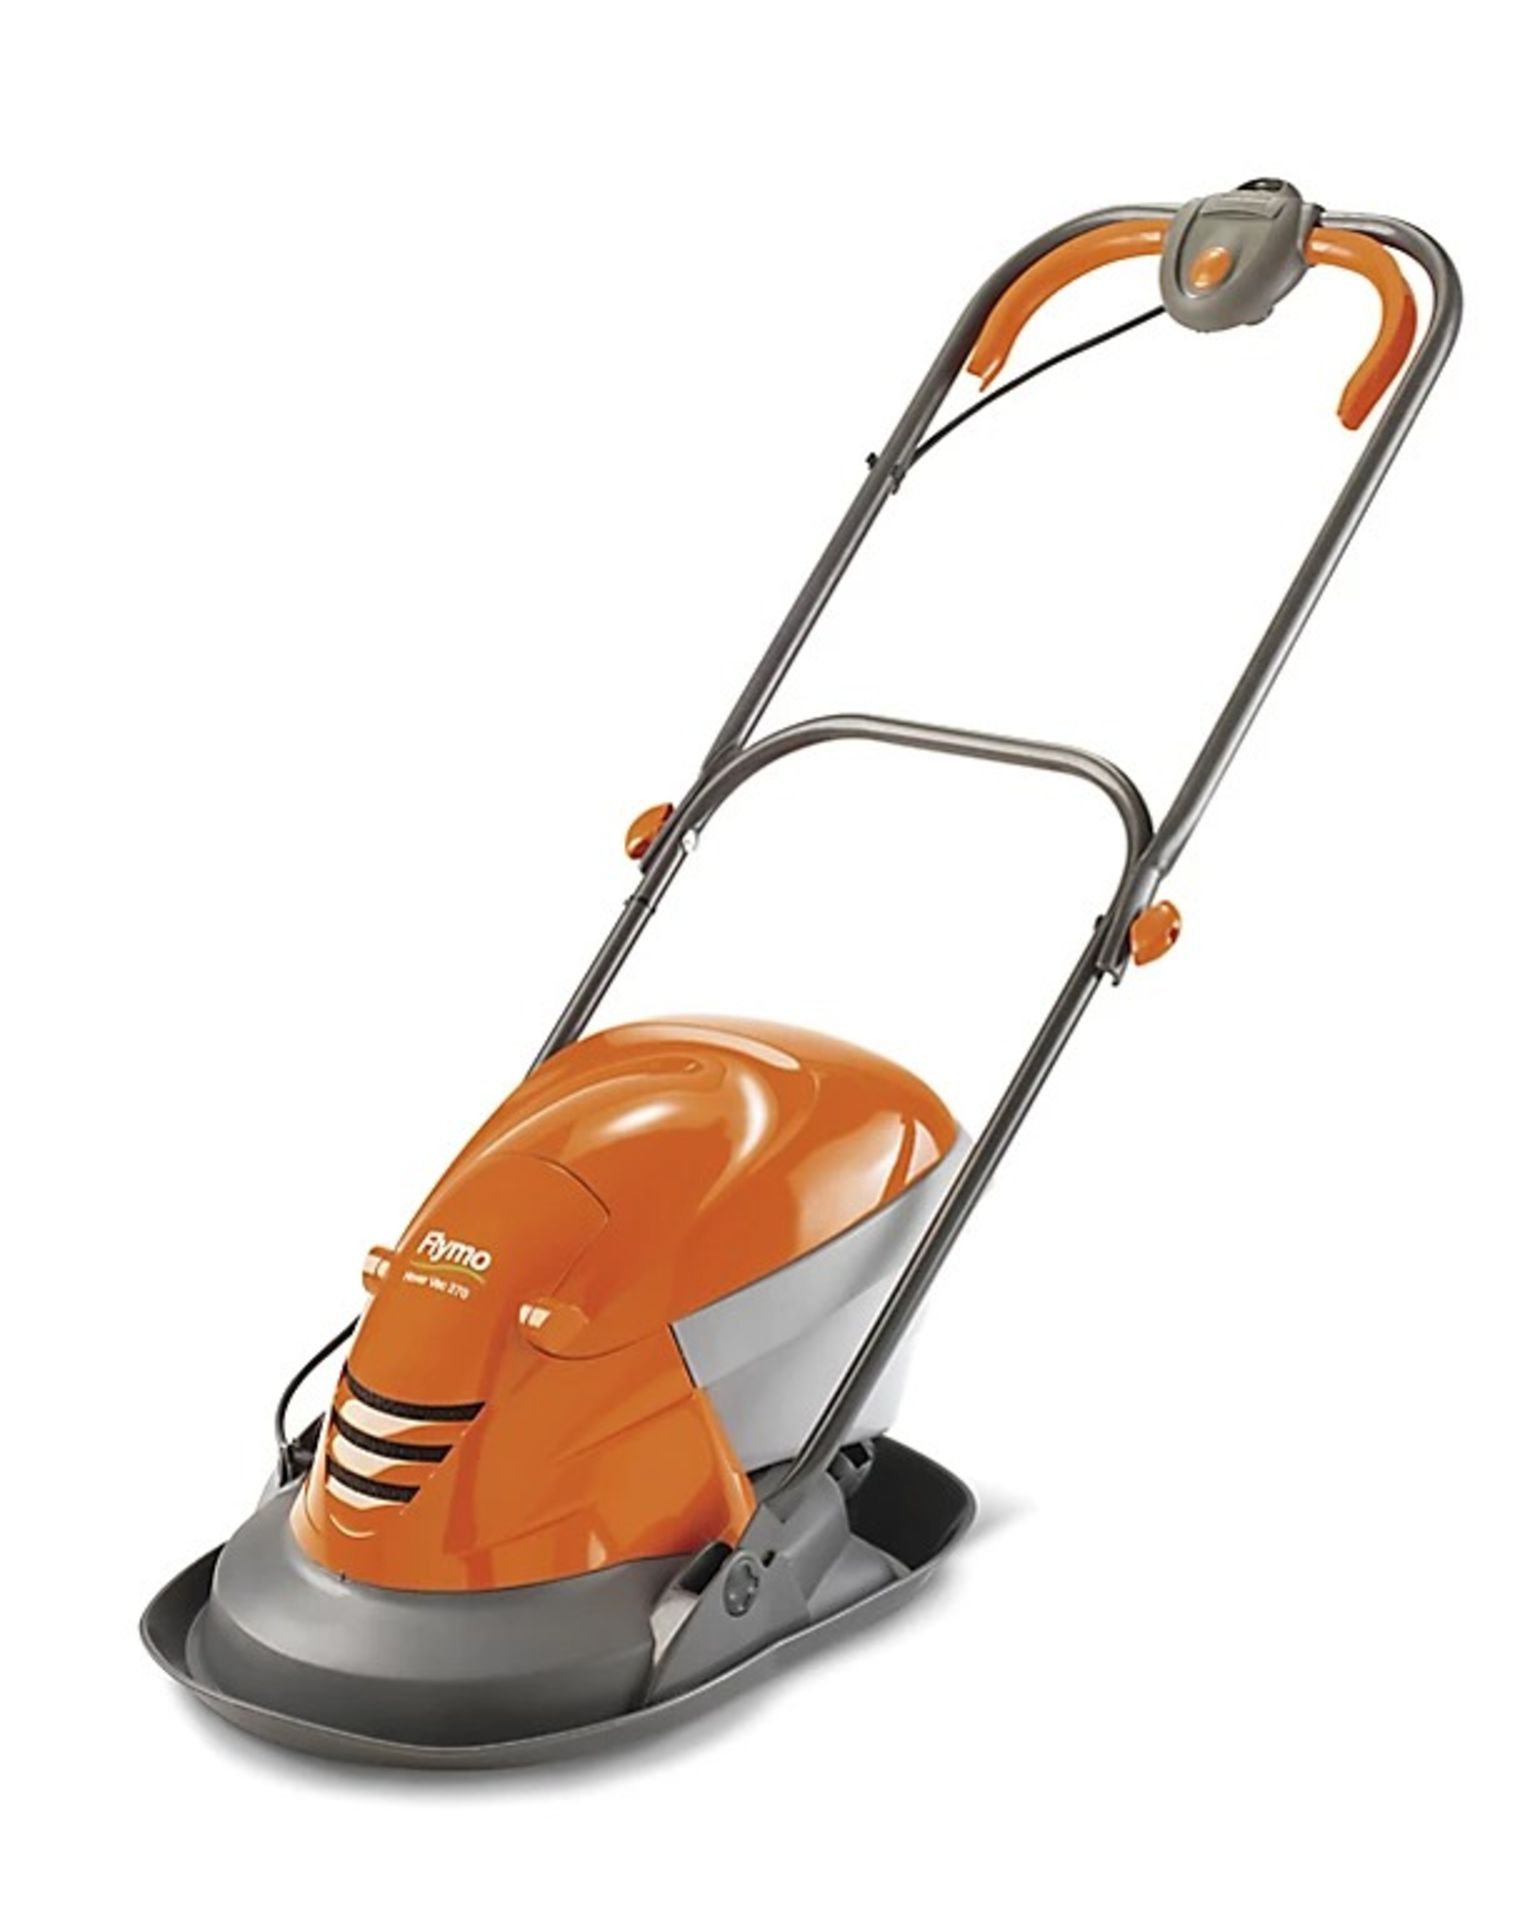 Flymo Hover Vac 270 Corded Hover Lawnmower - ER47